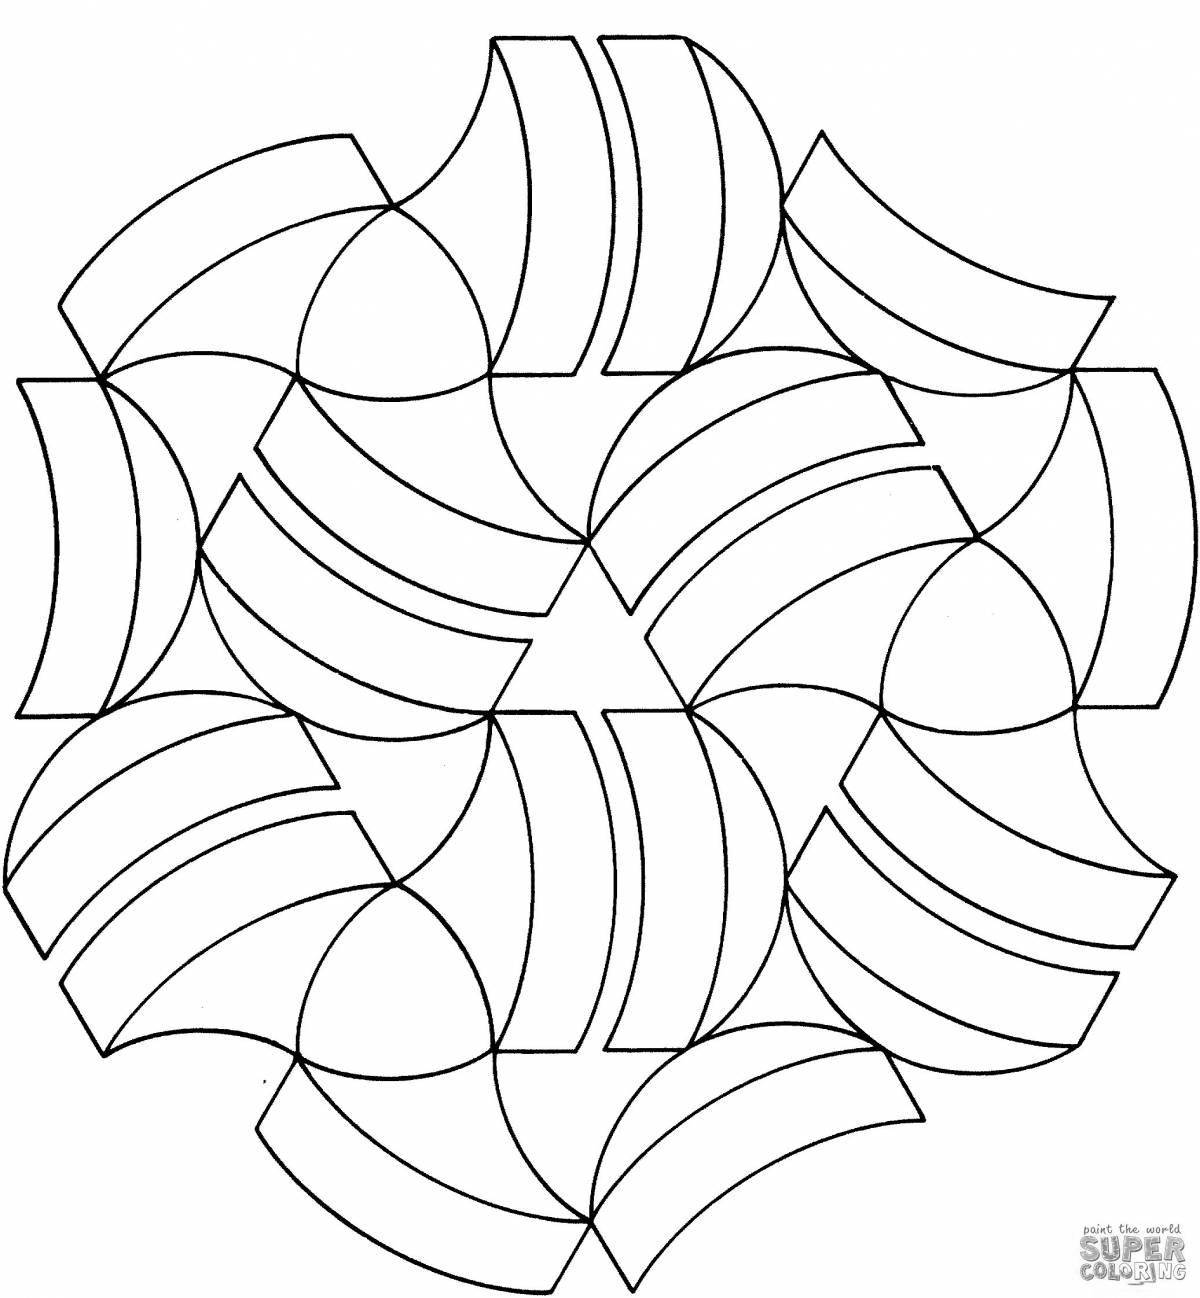 Charming fractal coloring book